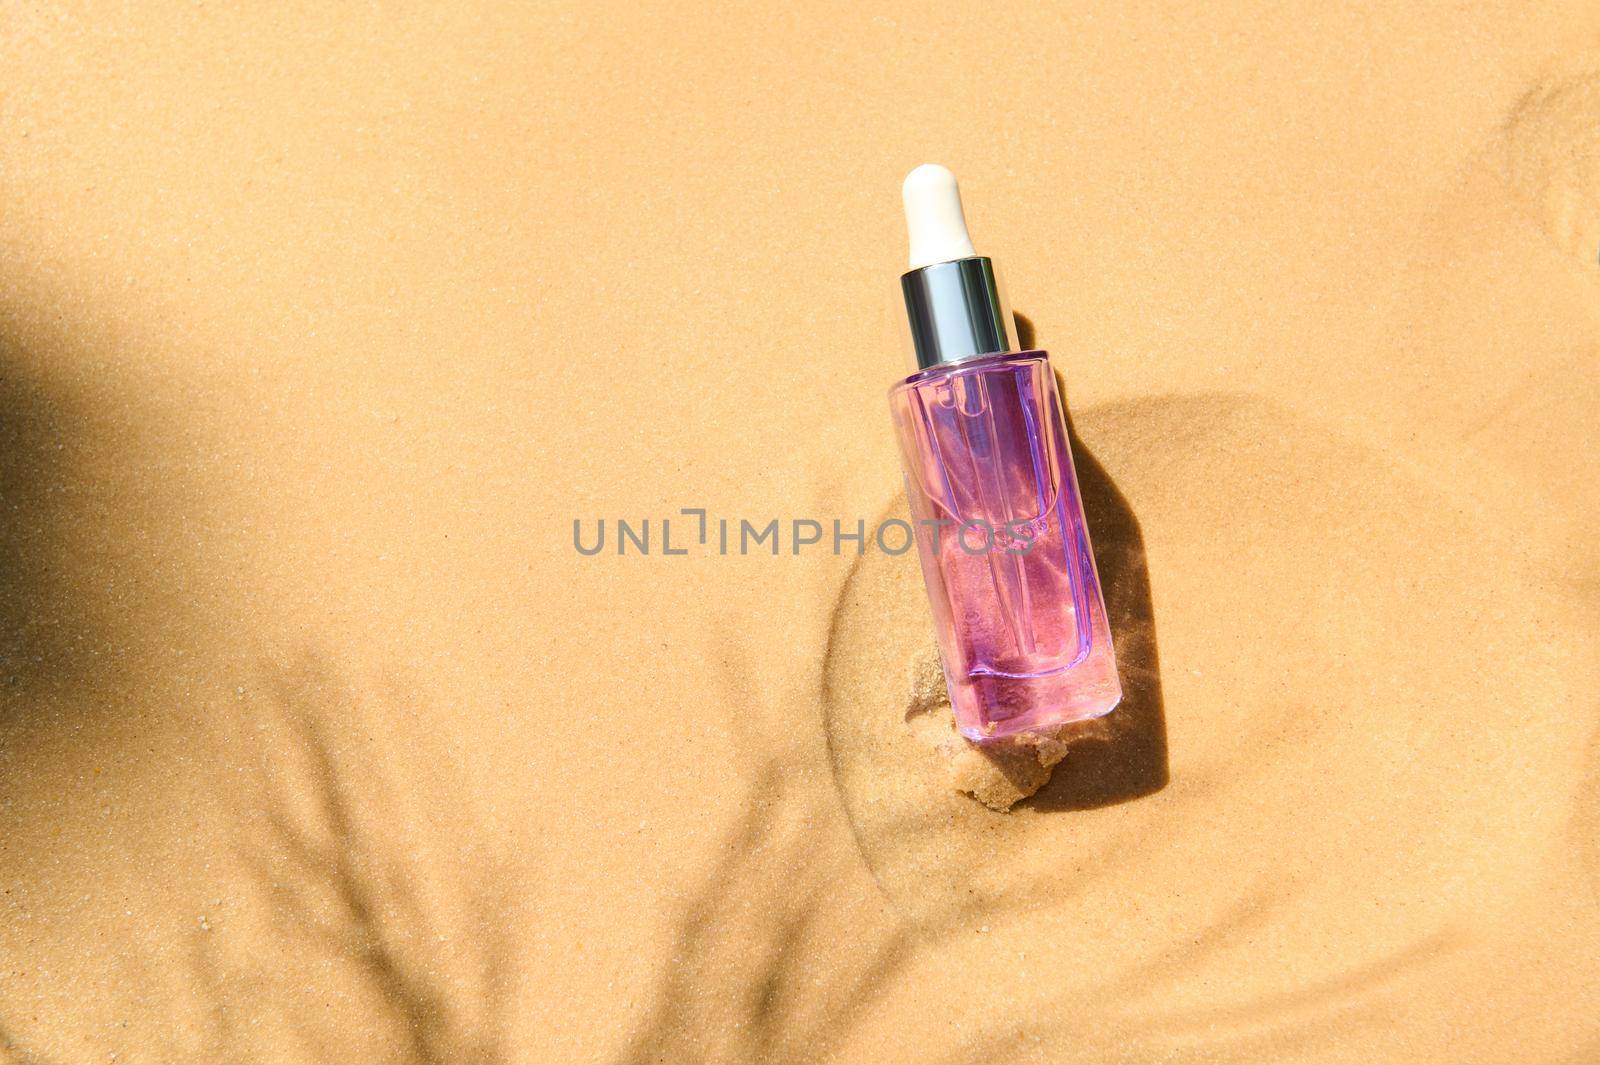 Anti aging serum with collagen and peptides in light violet glass bottle with dropper on sandy background with sunlight and shadow from palm leaf. Skincare essence for beautiful healthy skin. Top view